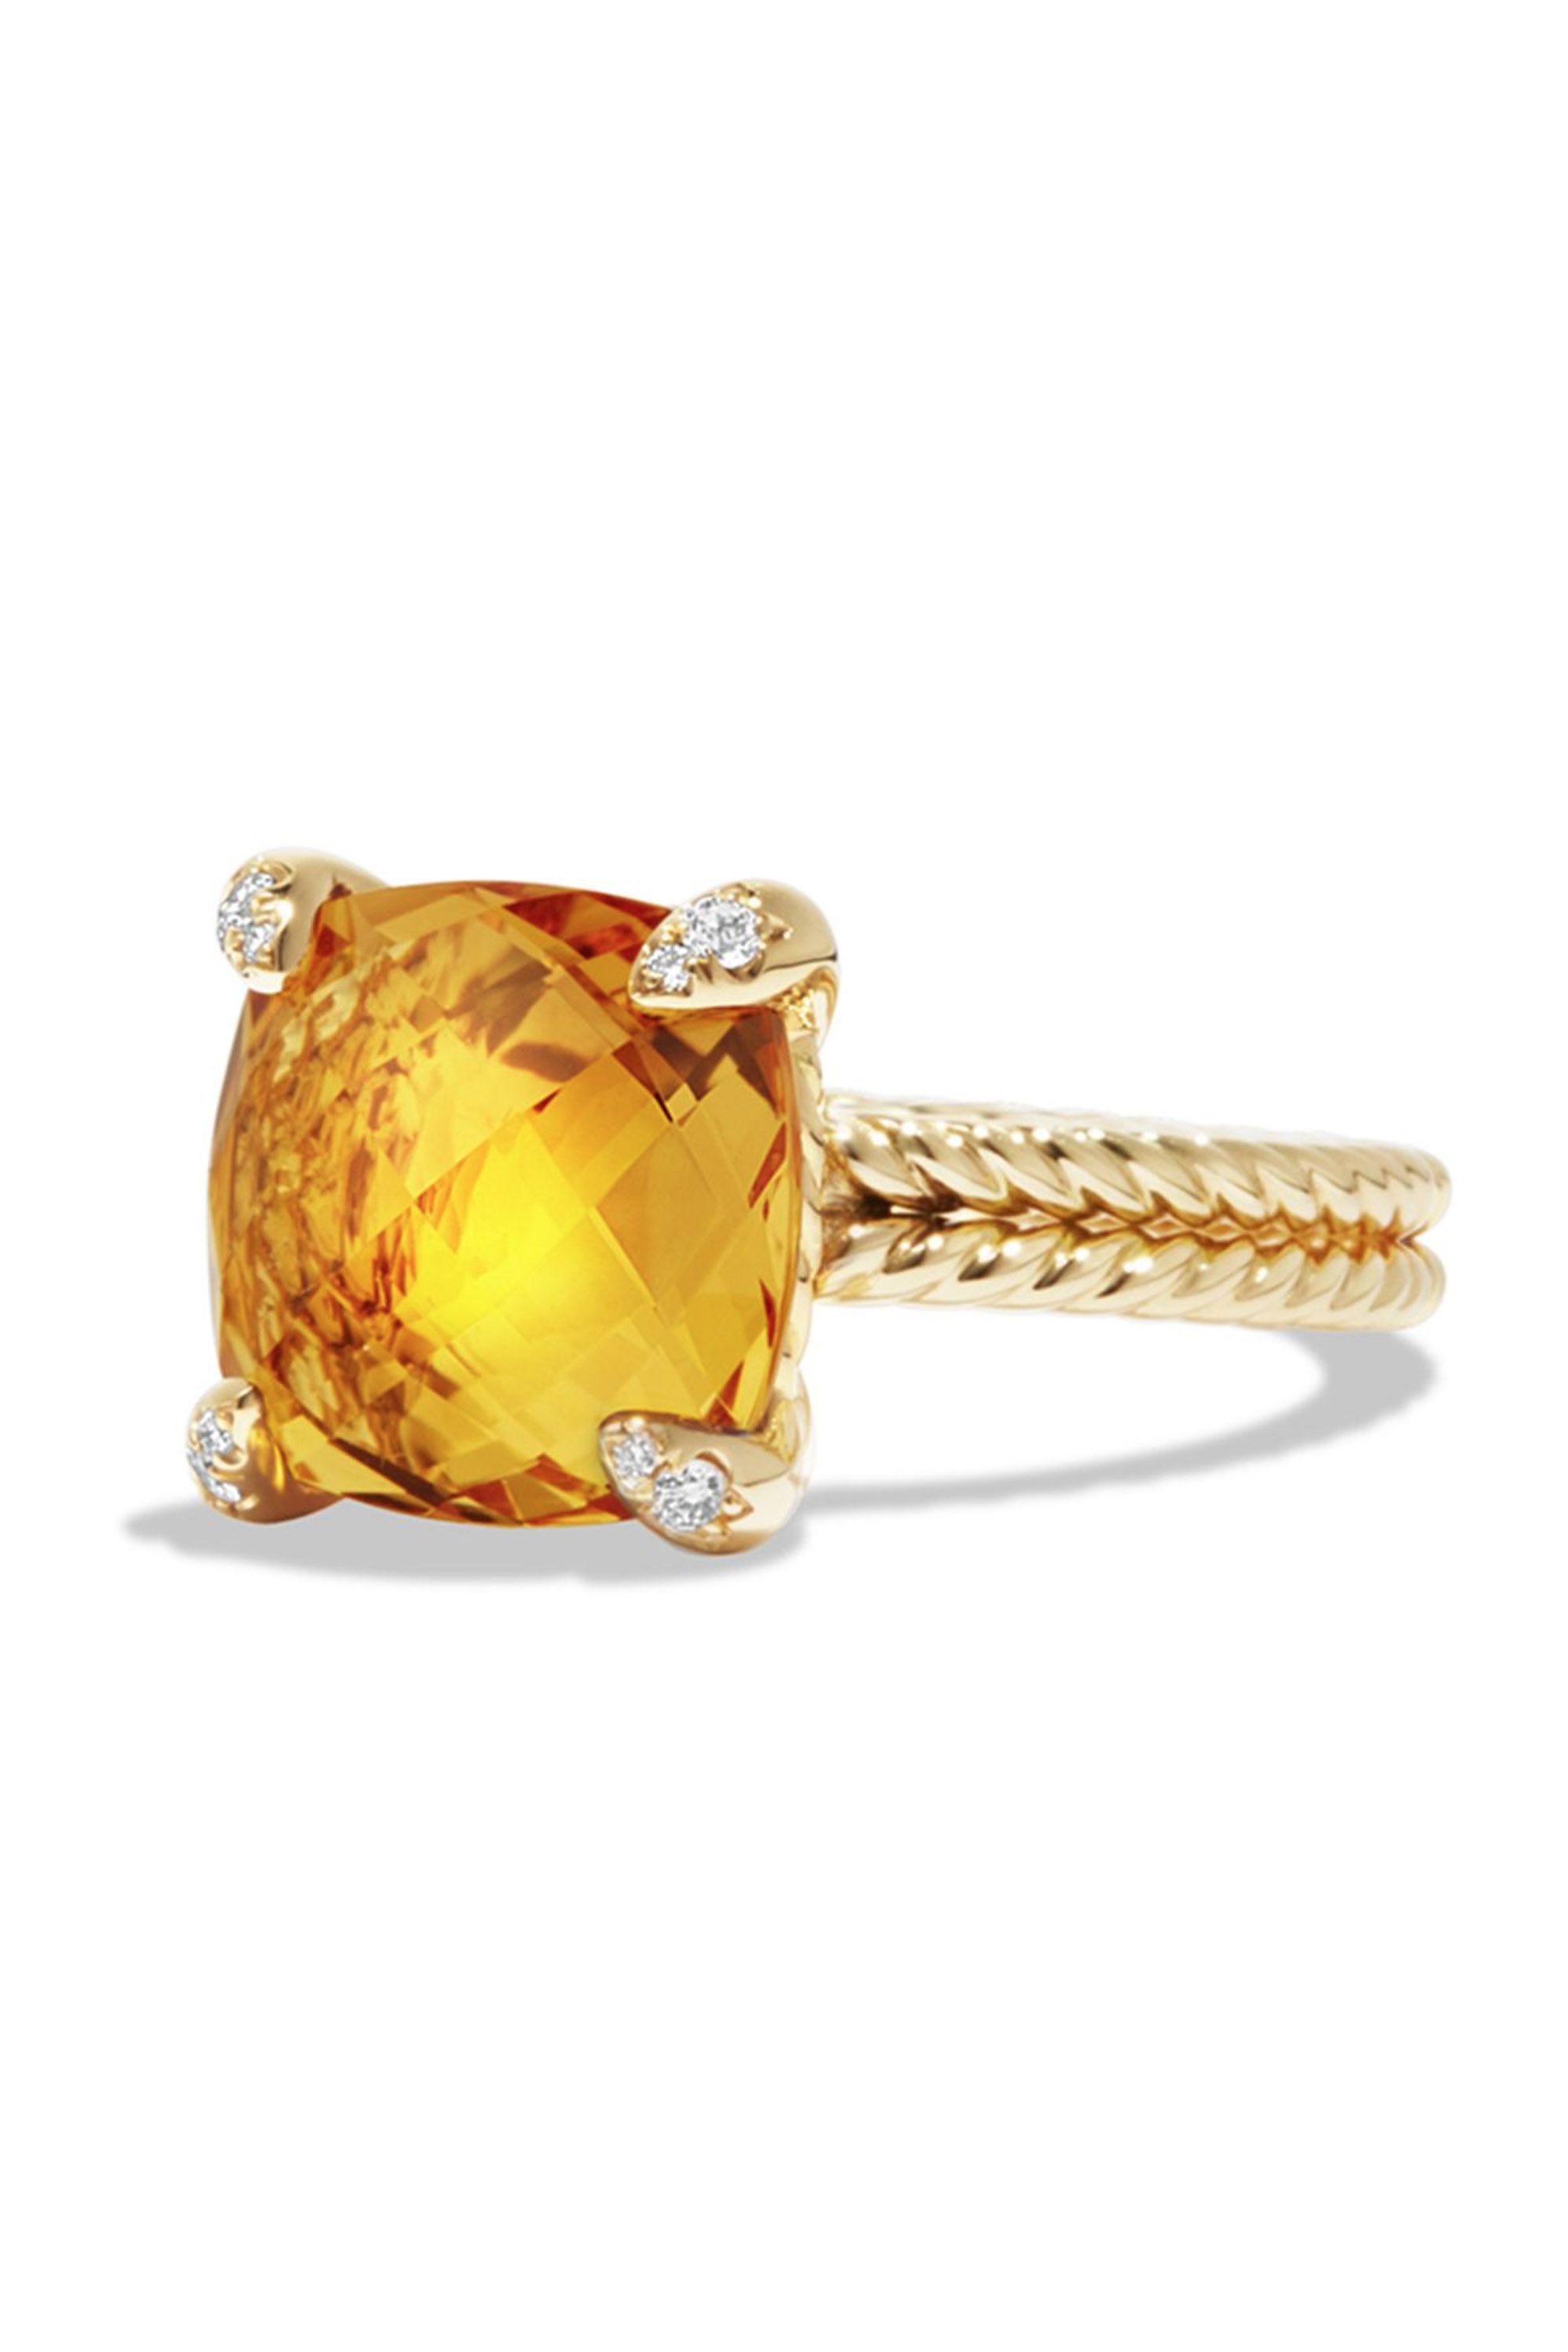 Châtelaine Ring with Citrine and Diamonds